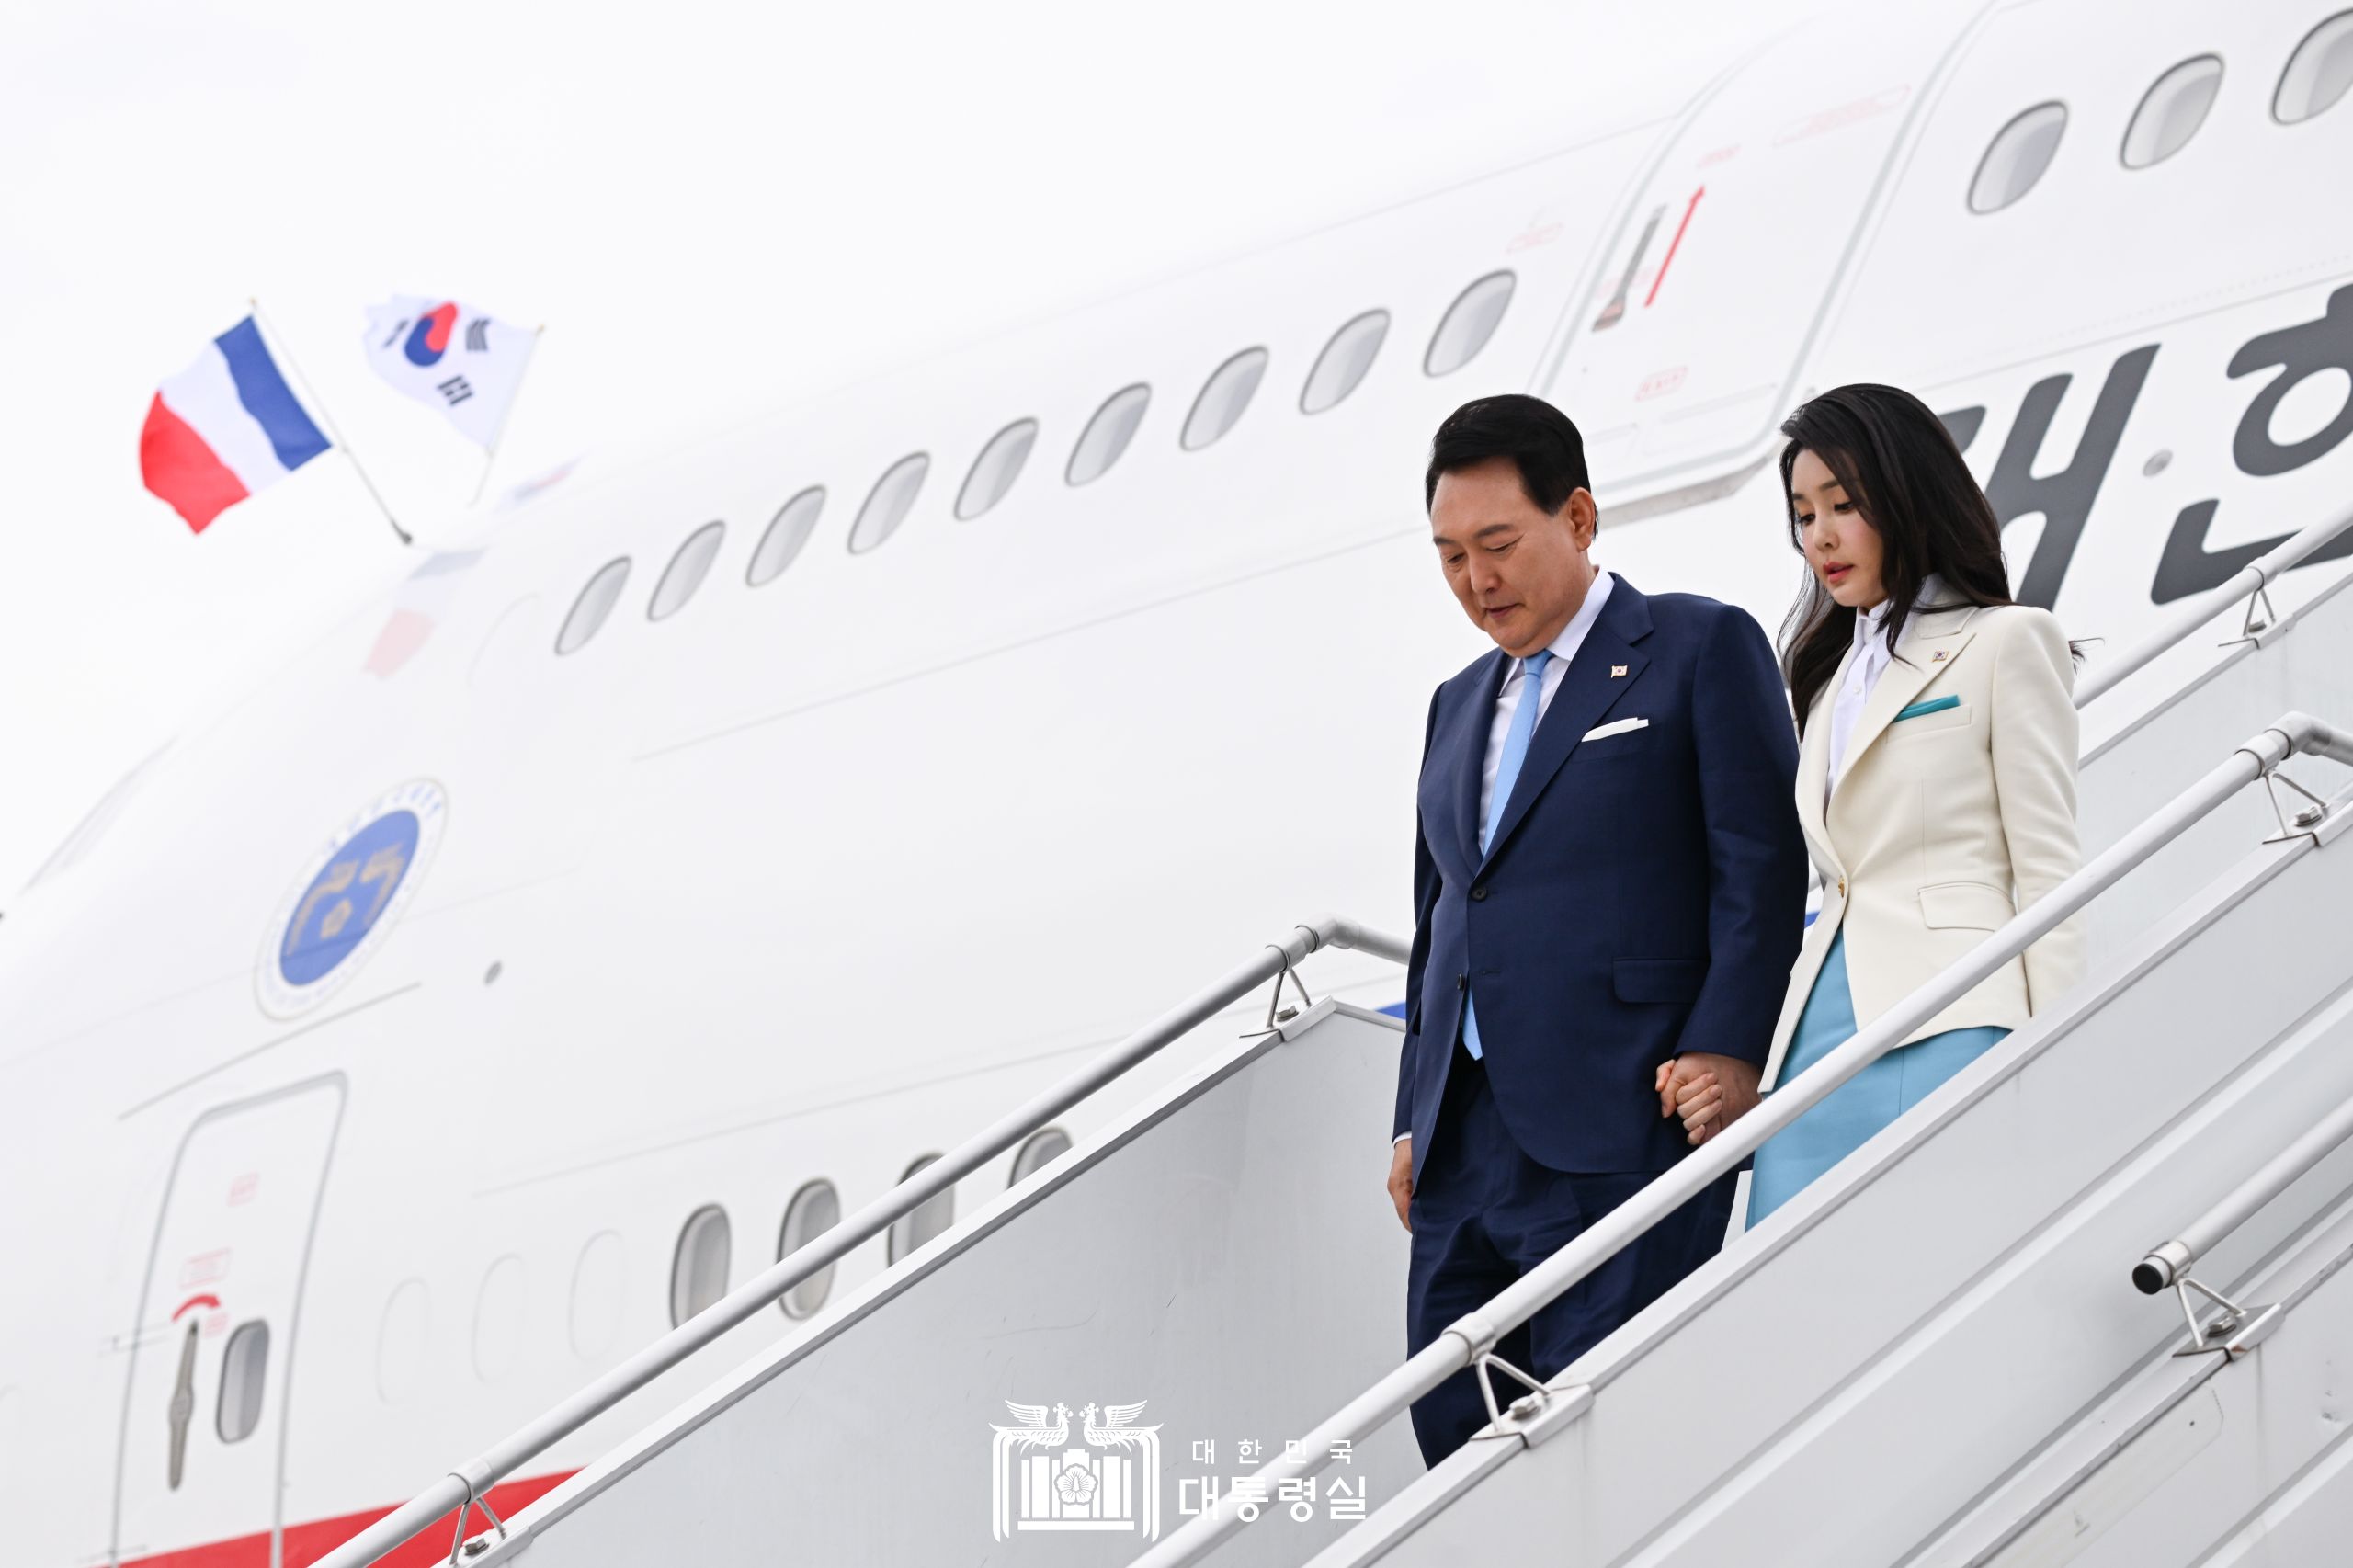 President Yoon Suk Yeol and first lady Kim Keon Hee on June 19 disembark from the presidential plane Code One at Paris-Orly Airport in the French capital.